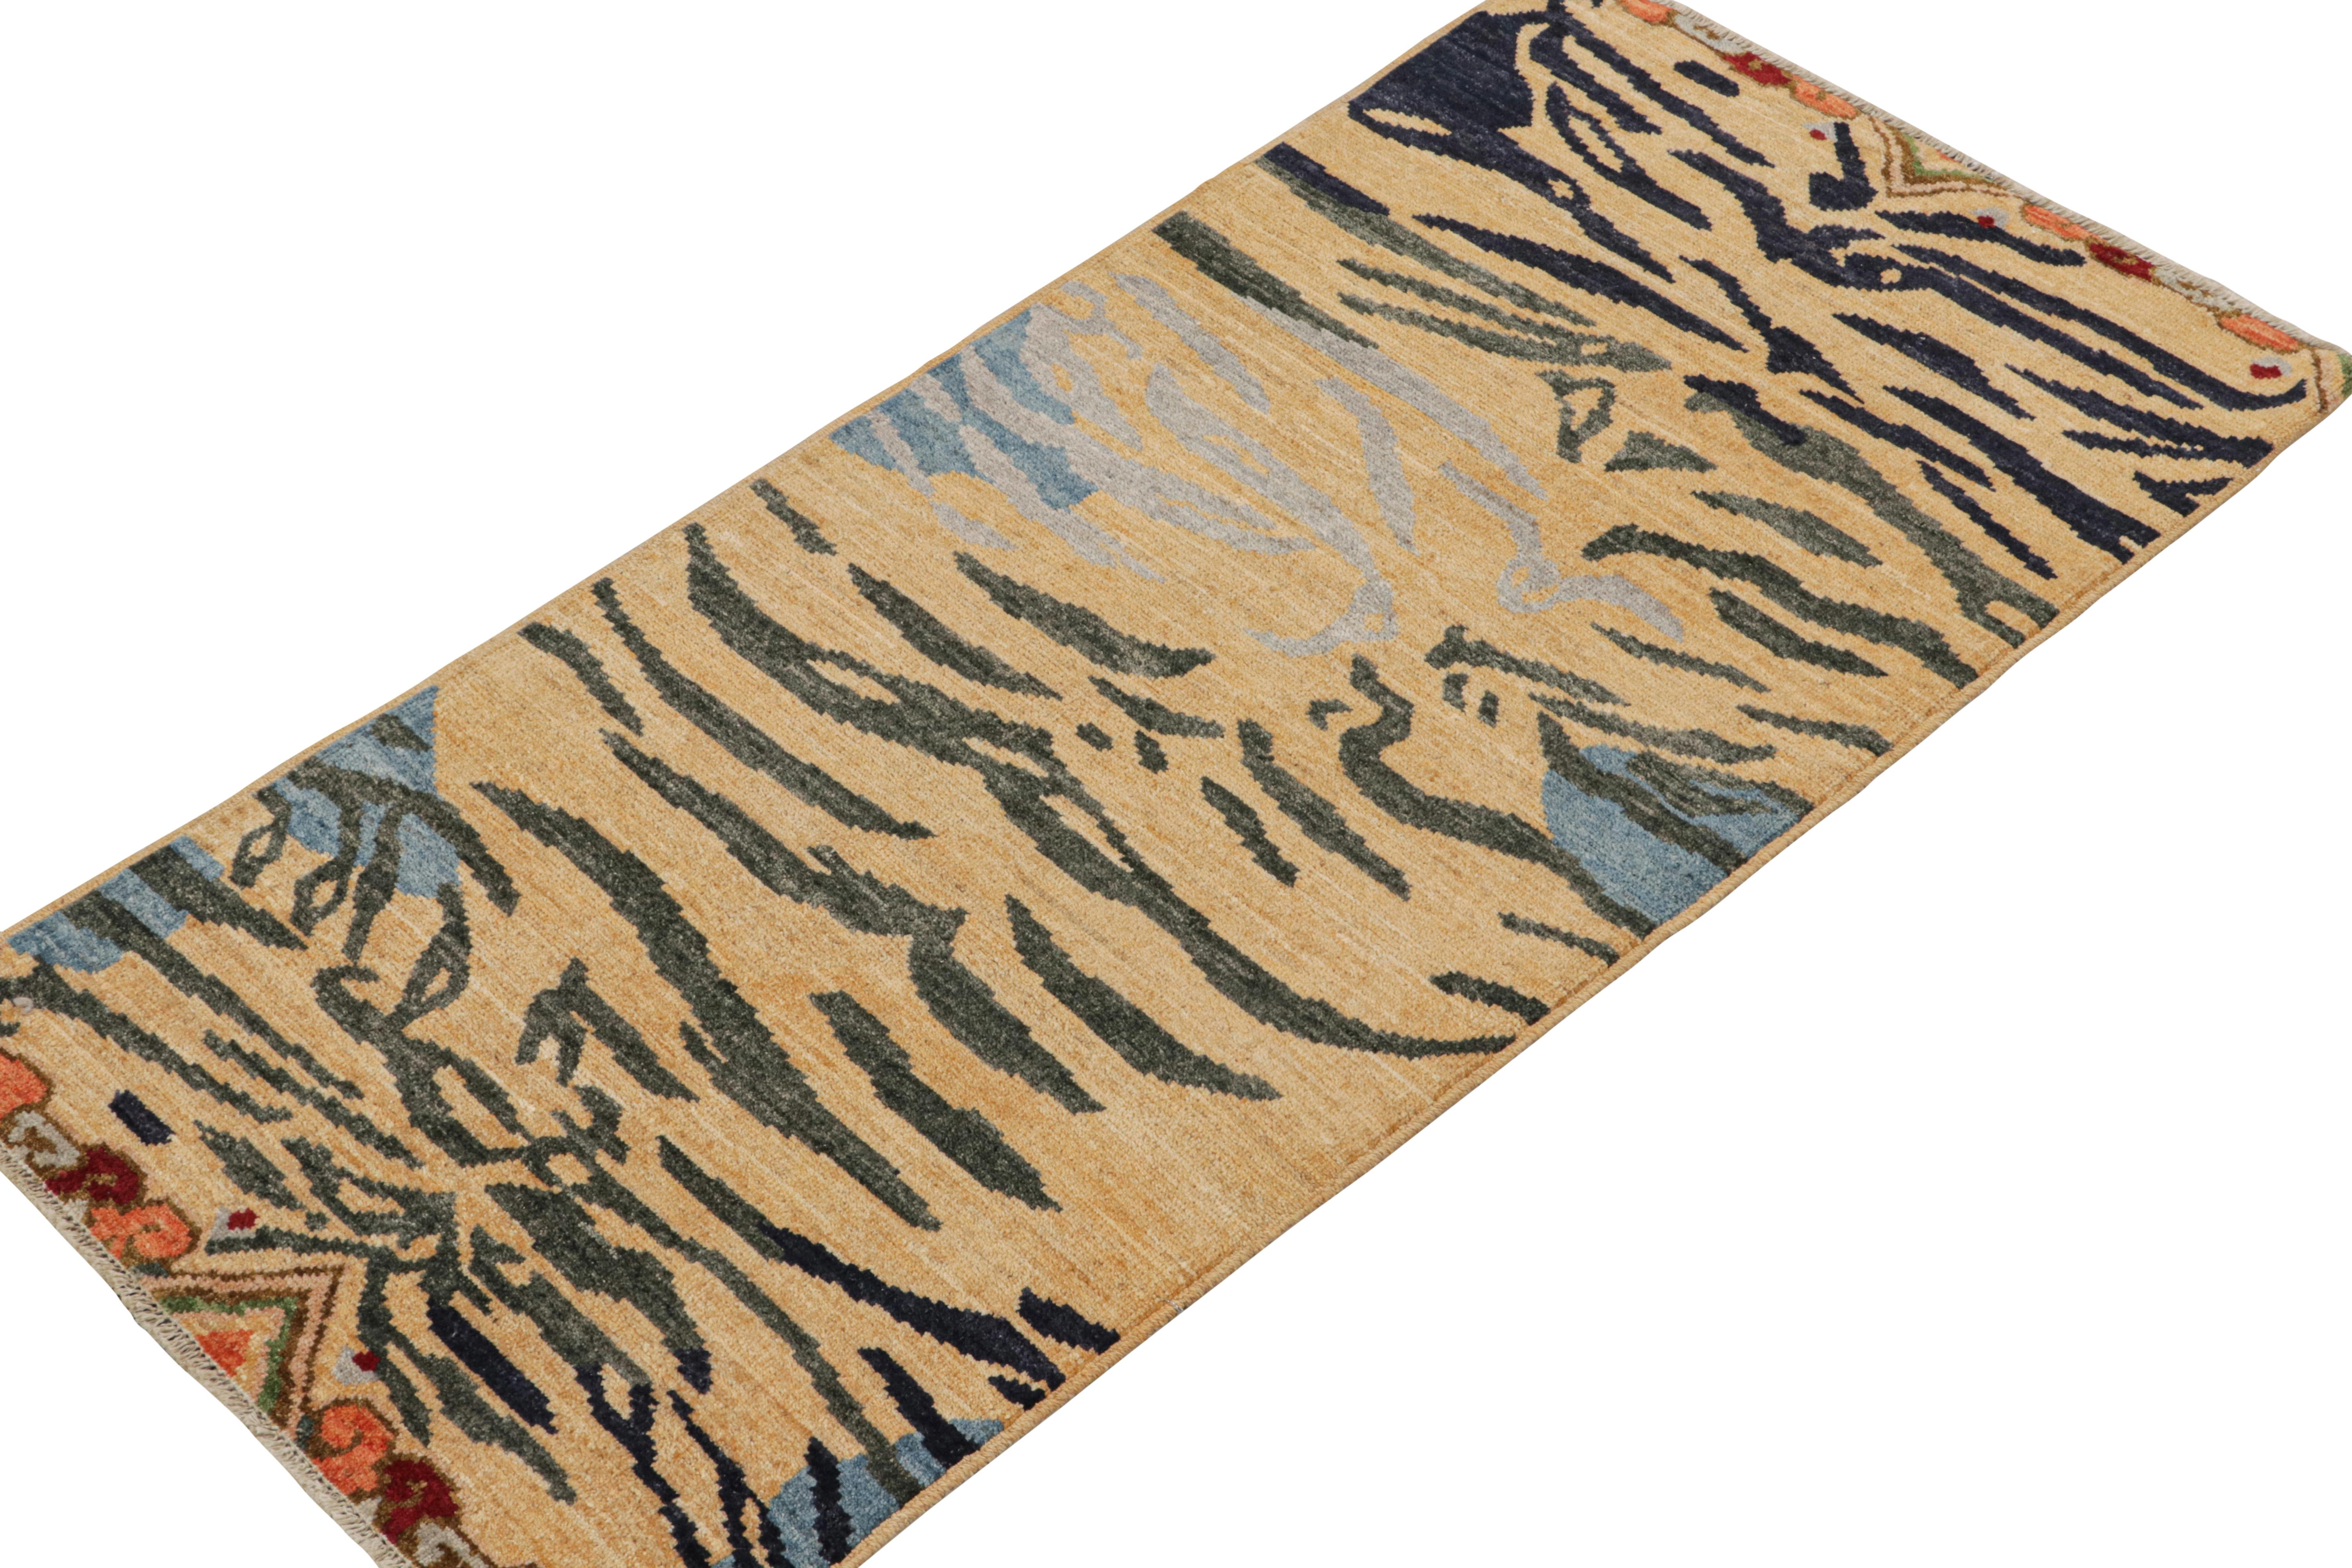 Pakistanais Tapis & Kilim's Classic Style Tiger-Skin Runner in Gold with Gray and Blue Stripes (Tapis & Kilim's Classic Style Tiger-Skin Runner in Gold with Gray and Blue Stripes) en vente